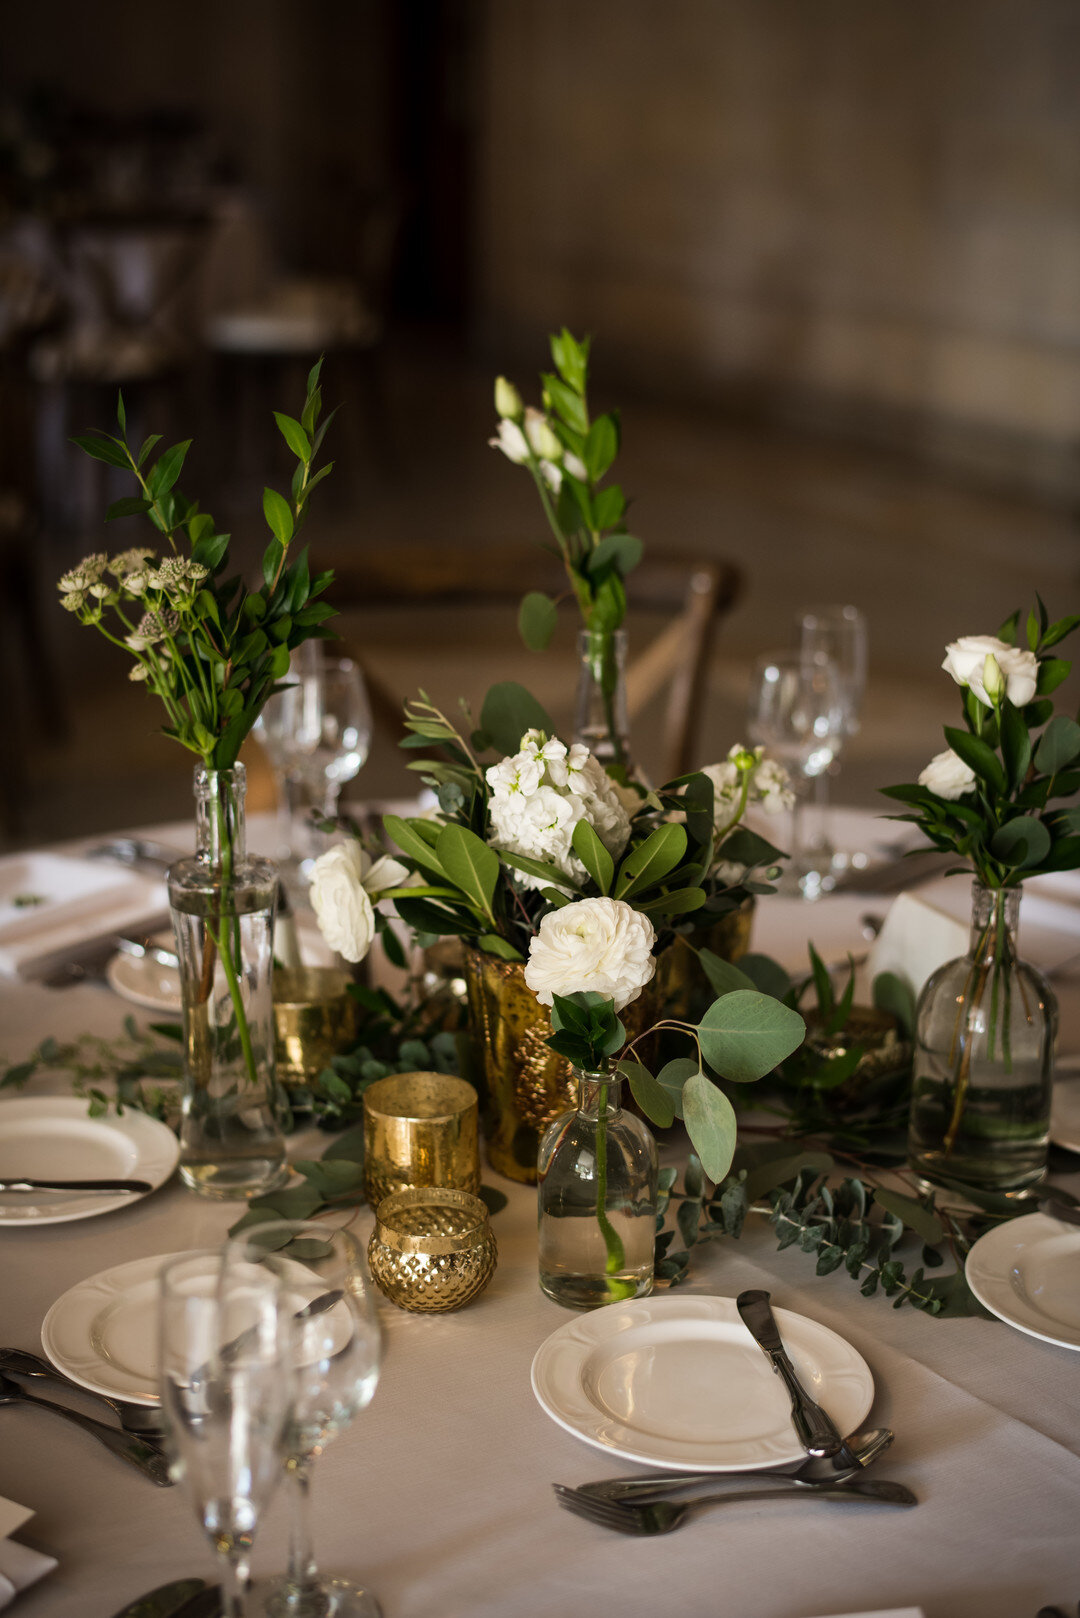 Greenery and white wedding centerpieces: Golden Hour Armour House Chicago Wedding captured by Inspired Eye Photography featured on CHI thee WED. Find more wedding ideas at CHItheeWED.com!